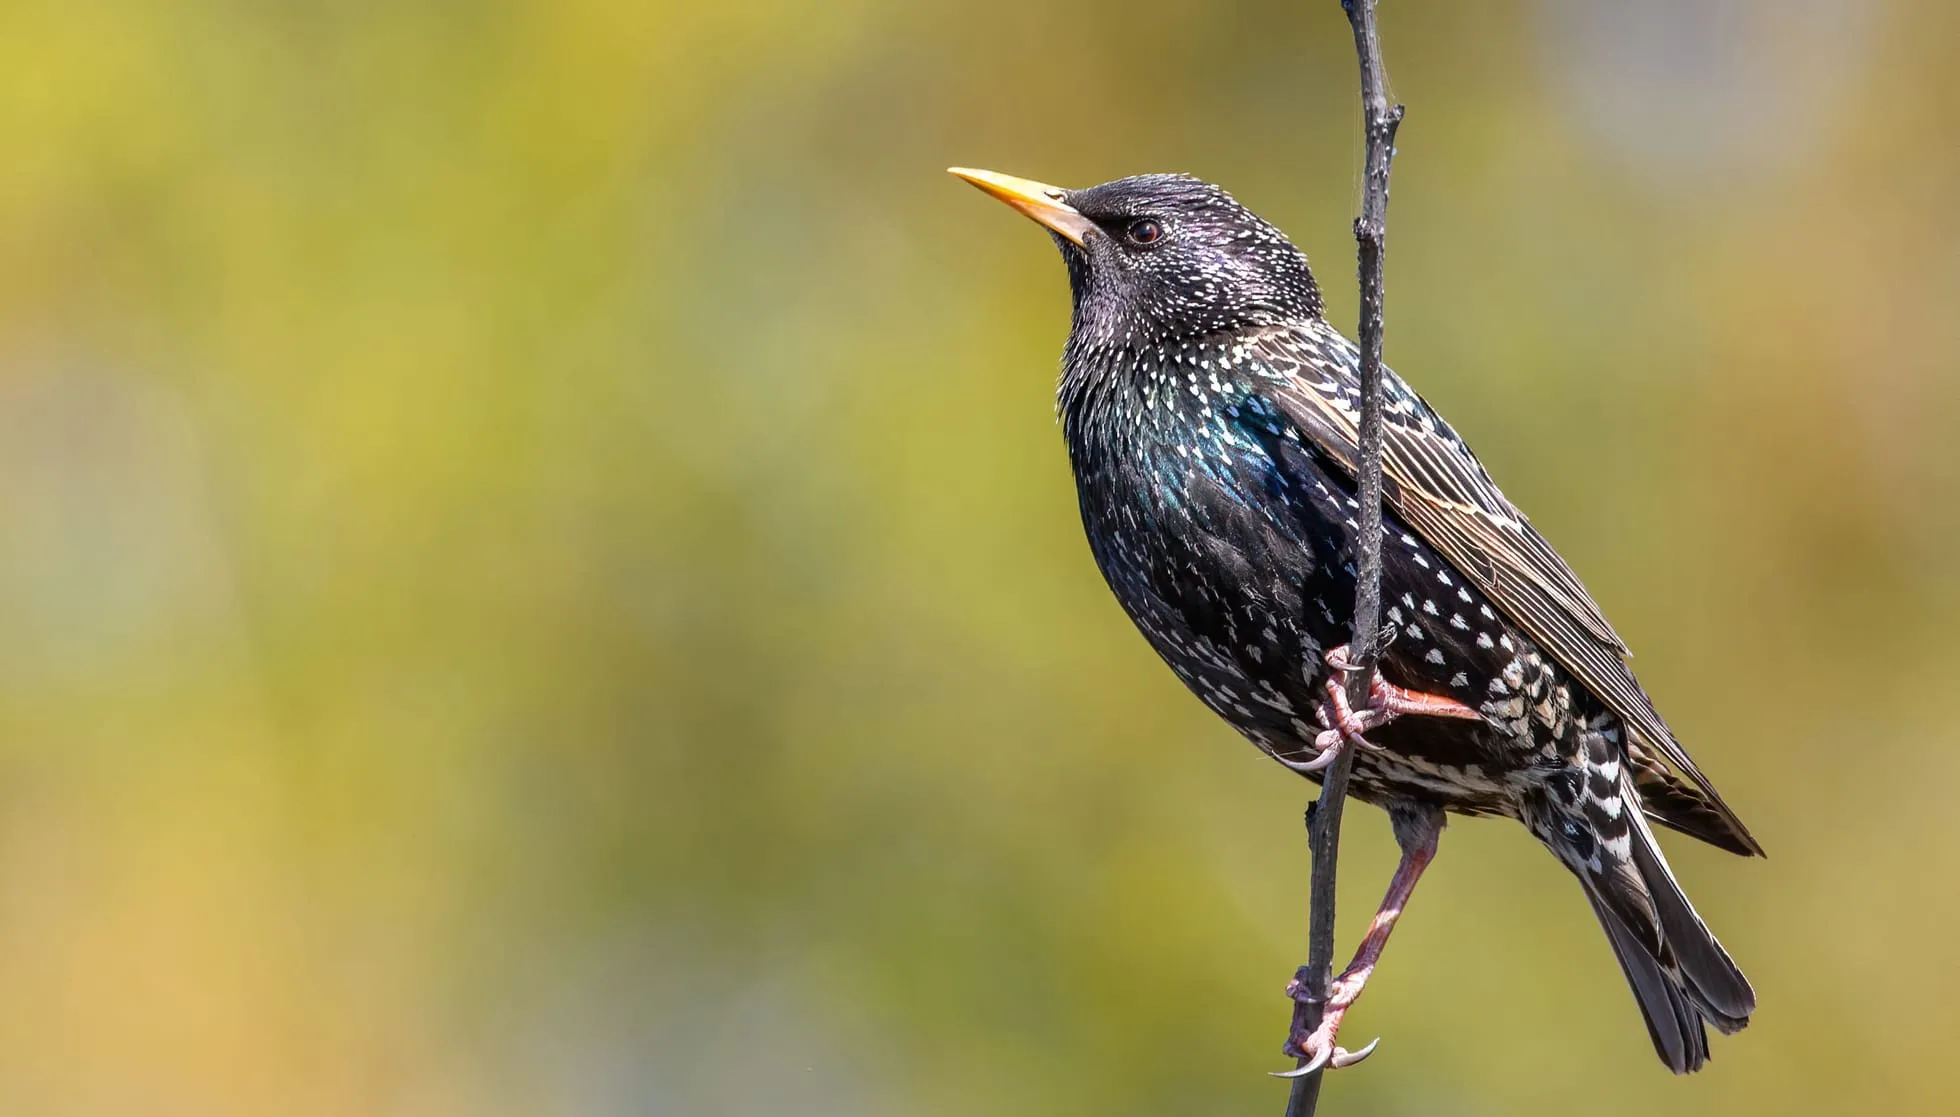 Common Starling perched on a twig